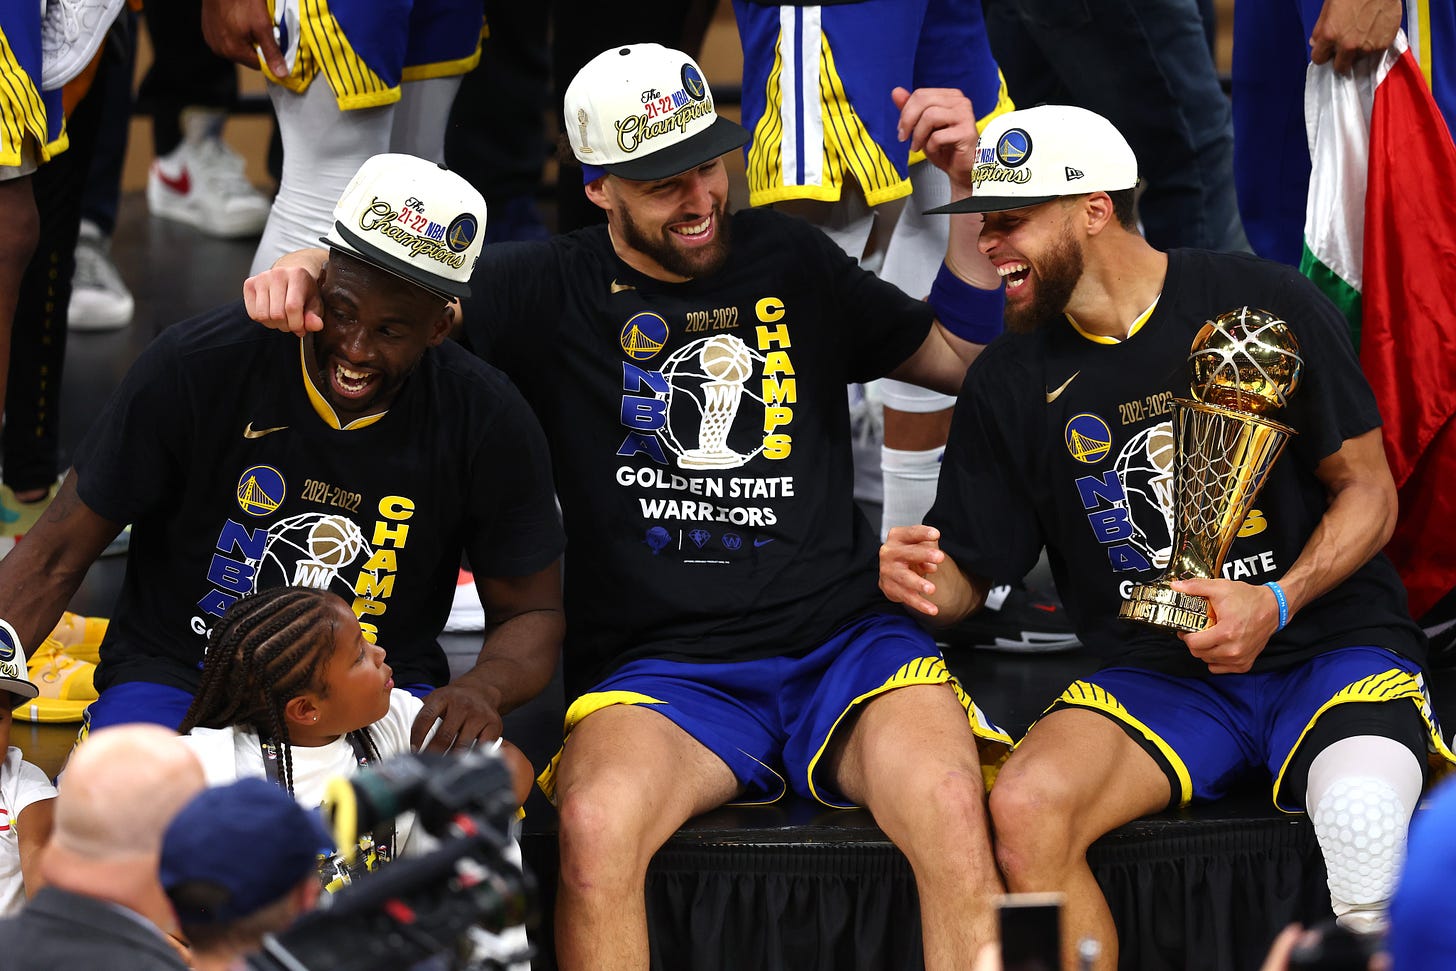 NBA History on X: "Stephen Curry, Draymond Green and Klay Thompson are the  second trio of teammates with at least one career All-NBA honor each to win  4+ NBA titles together in